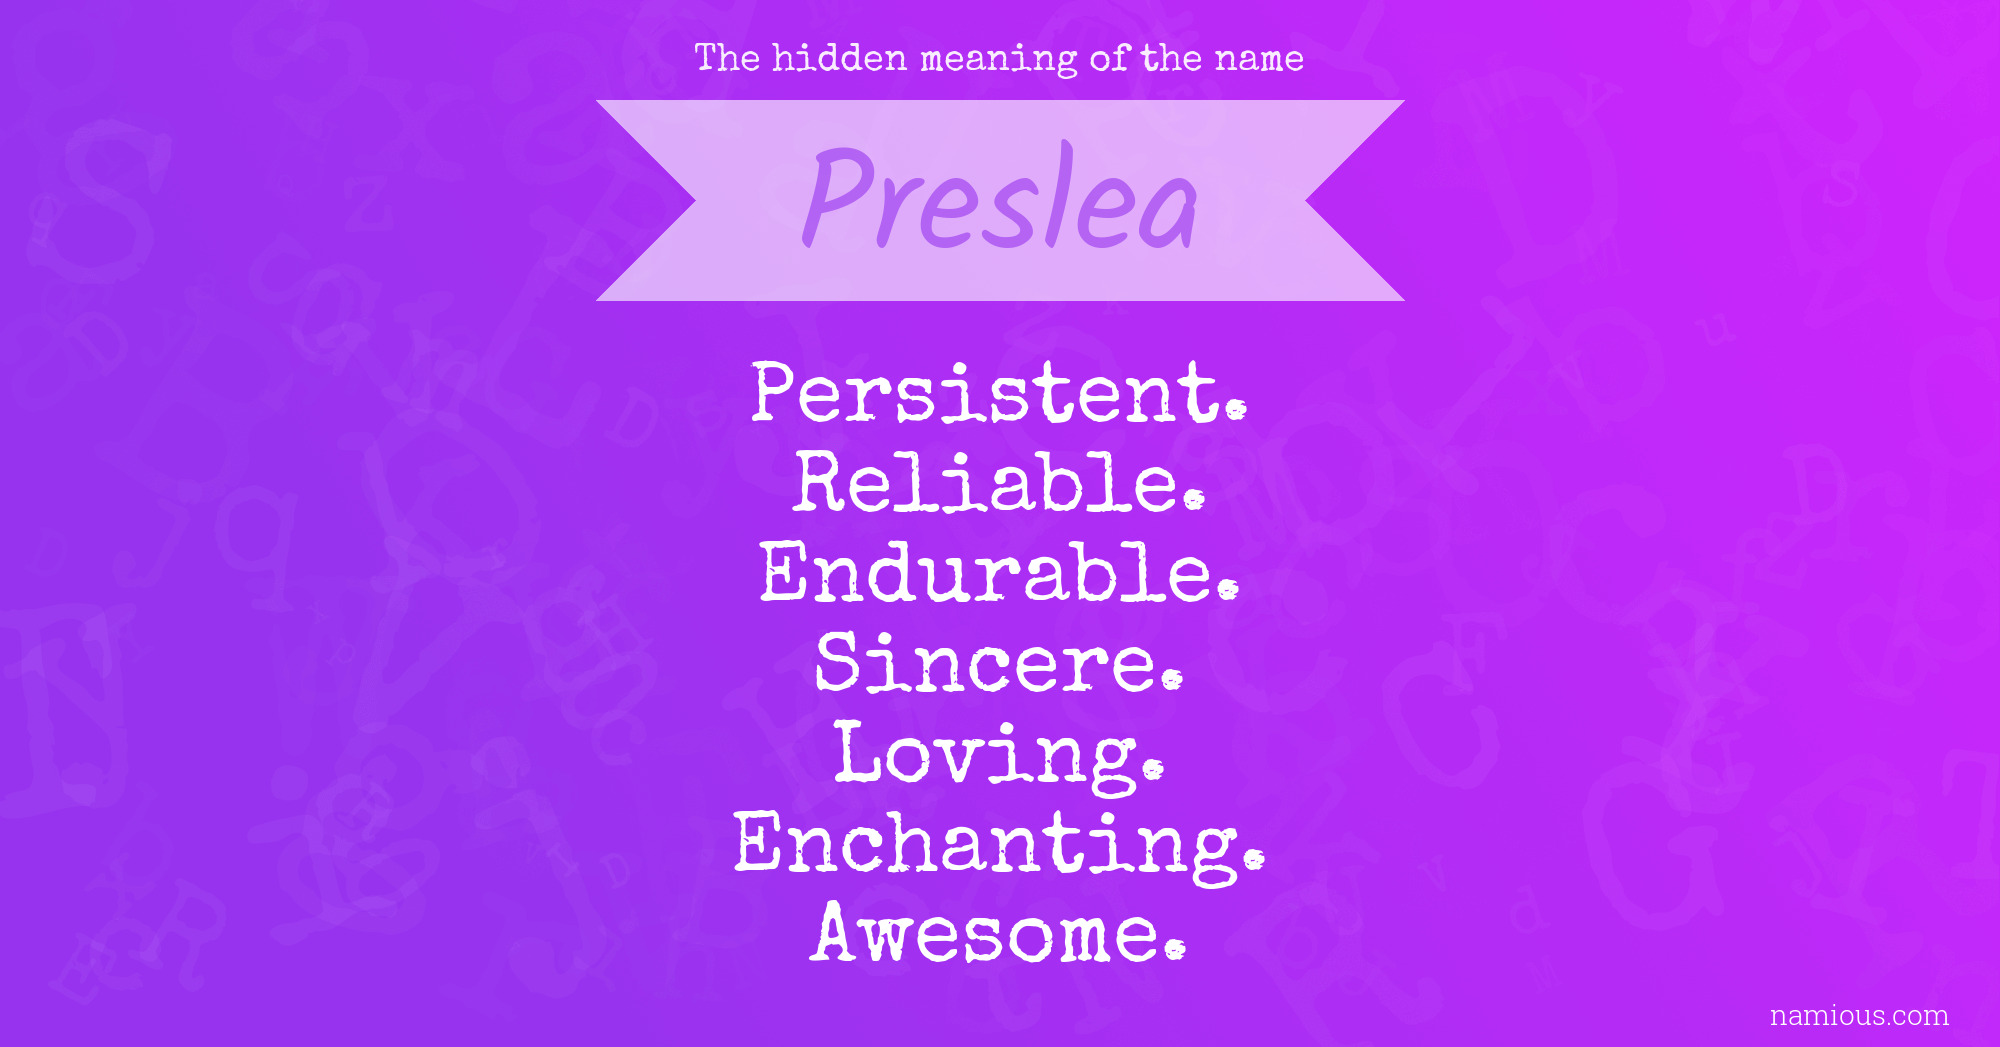 The hidden meaning of the name Preslea